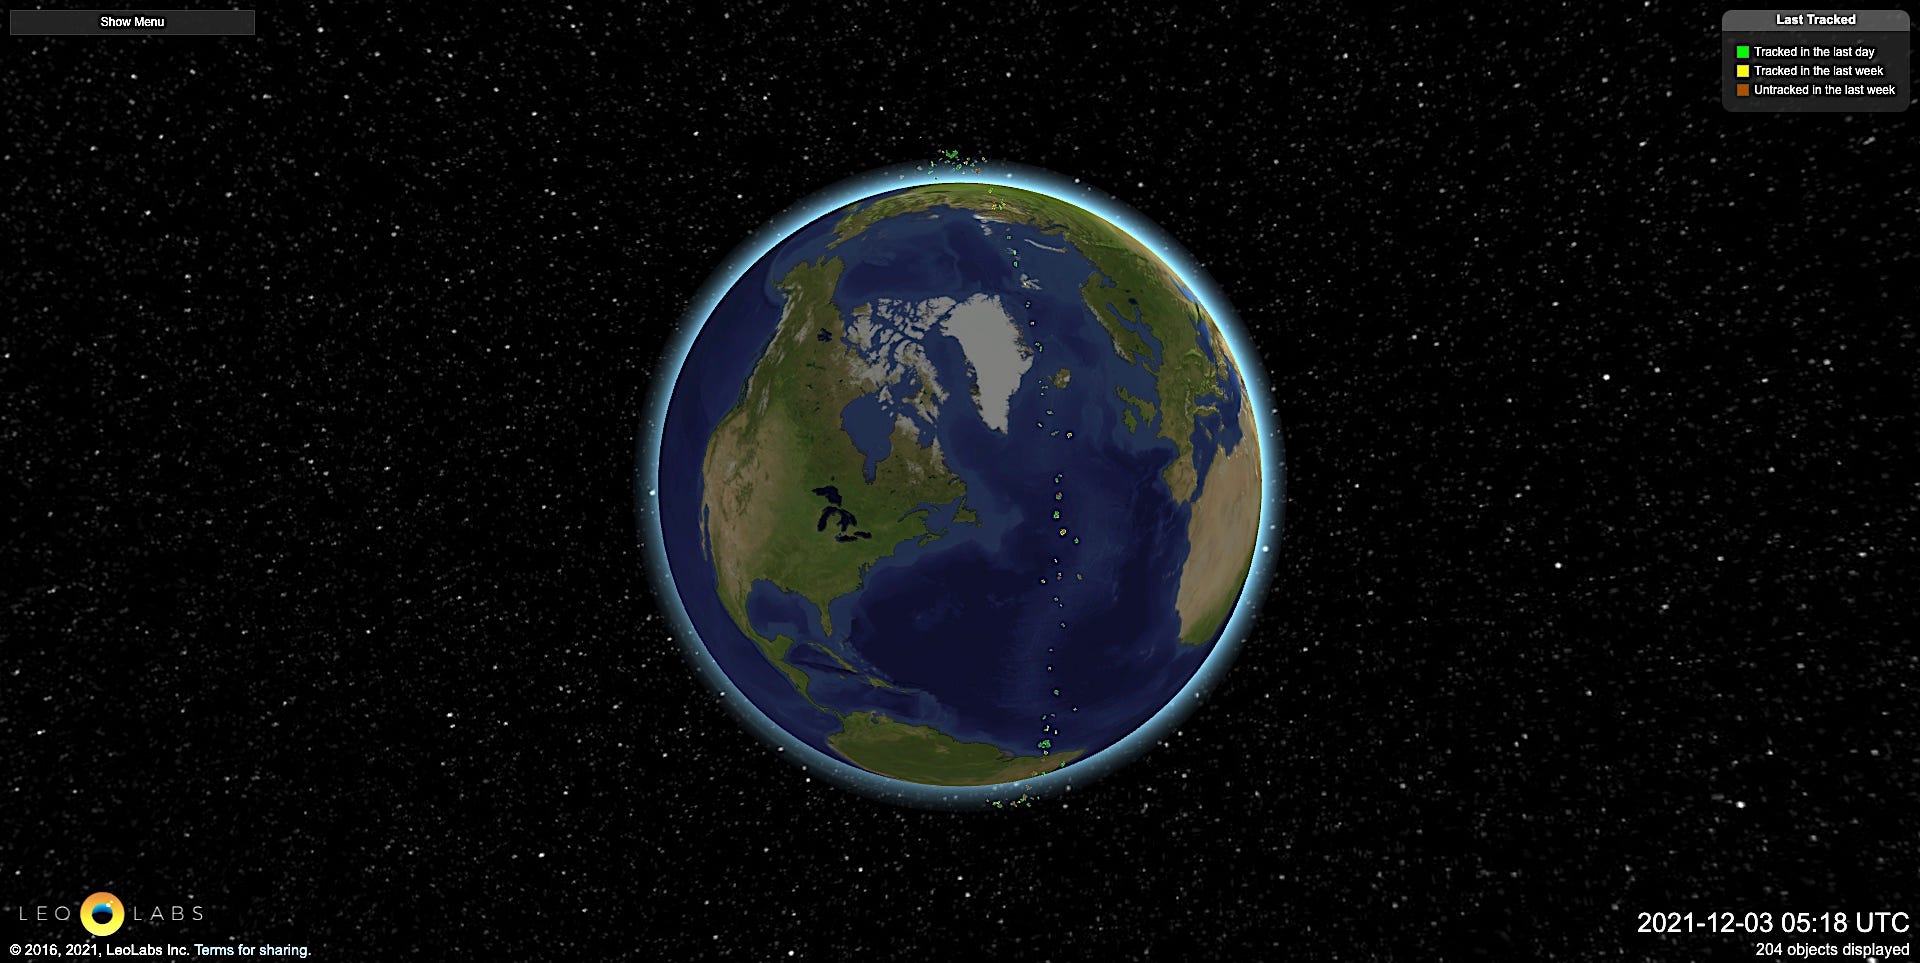 planet earth with an orbiting belt of multicolored dots representing debris